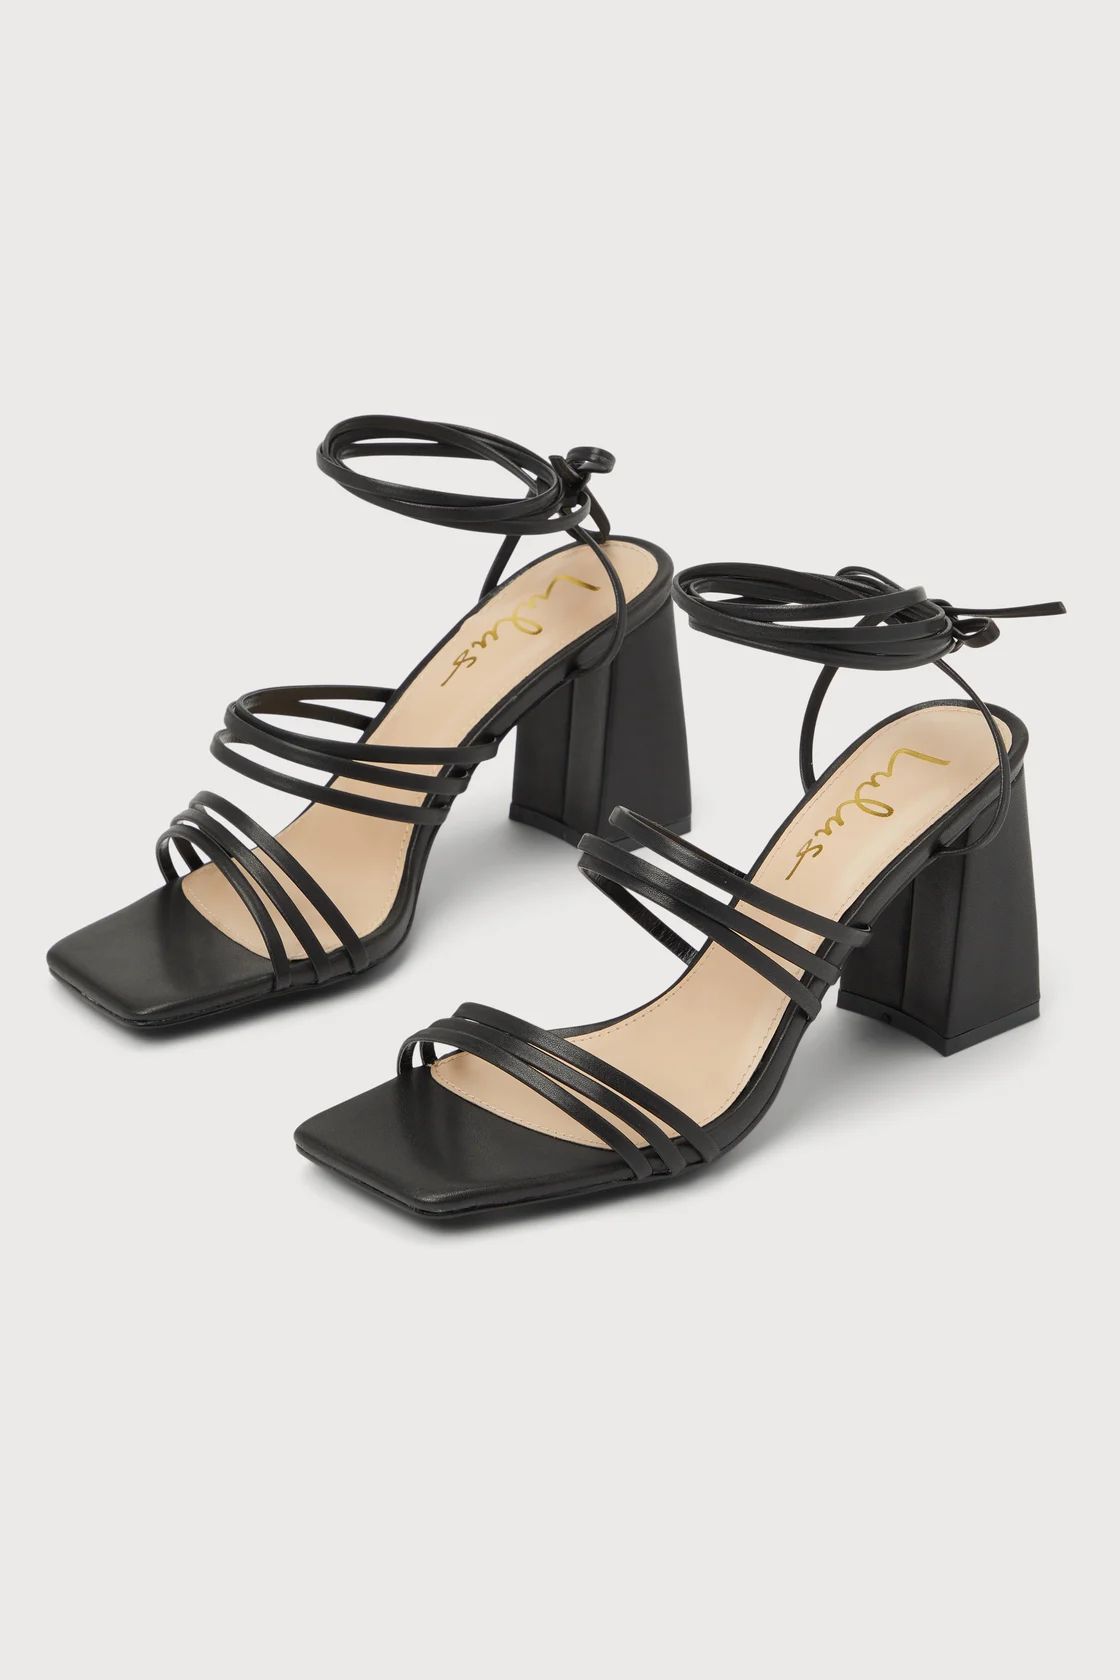 Arvid Black Strappy Lace-Up High Heel Sandals | Lulus (US)